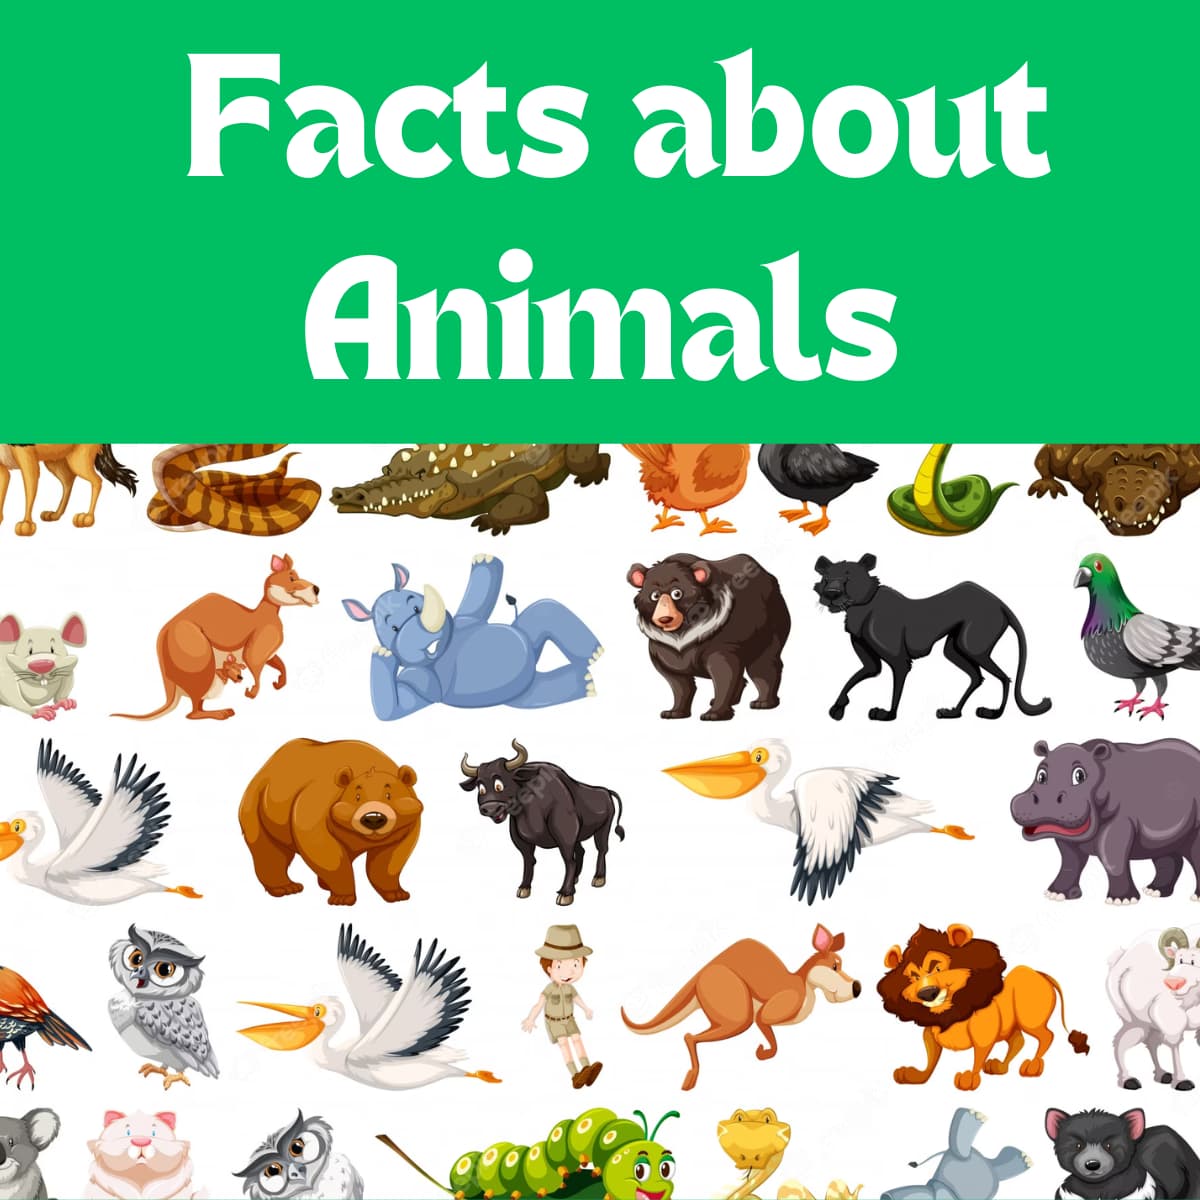 Facts about Animals, Animals, Animals, Facts, Cool facts, Amazing facts